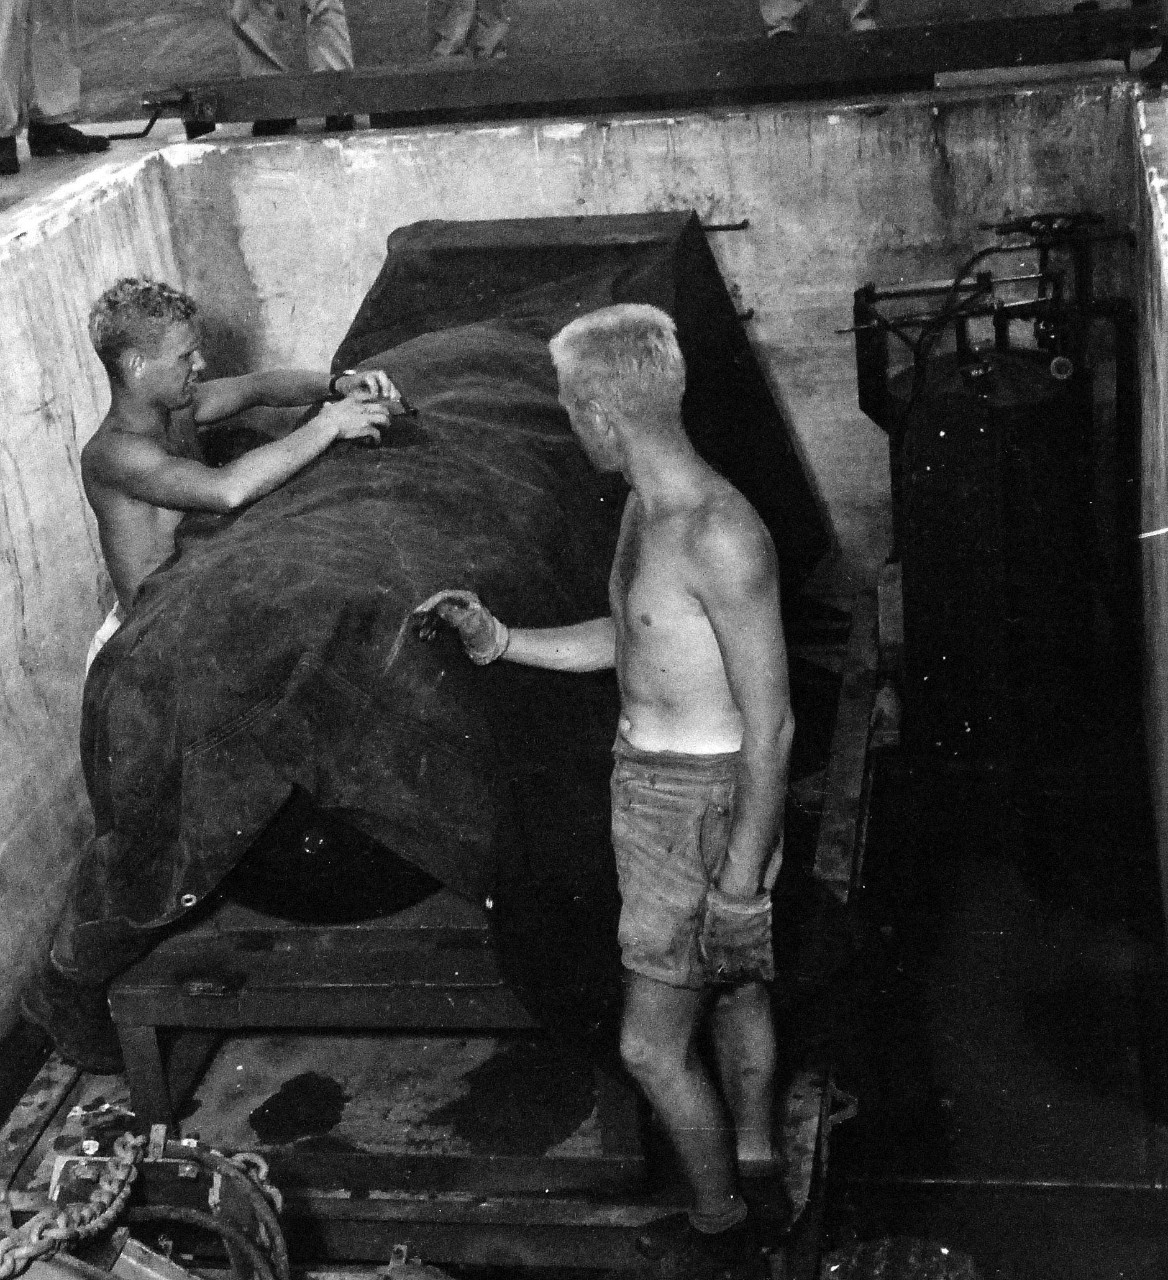 77-BT-121:  Tinian Island, August 1945.   Two enlisted men removing canvas cover from atomic bomb, Little Boy, in loading pit.   Official photograph of the Office of Chief of Engineers, now in the collection of the National Achives.   (2015/08/25). 